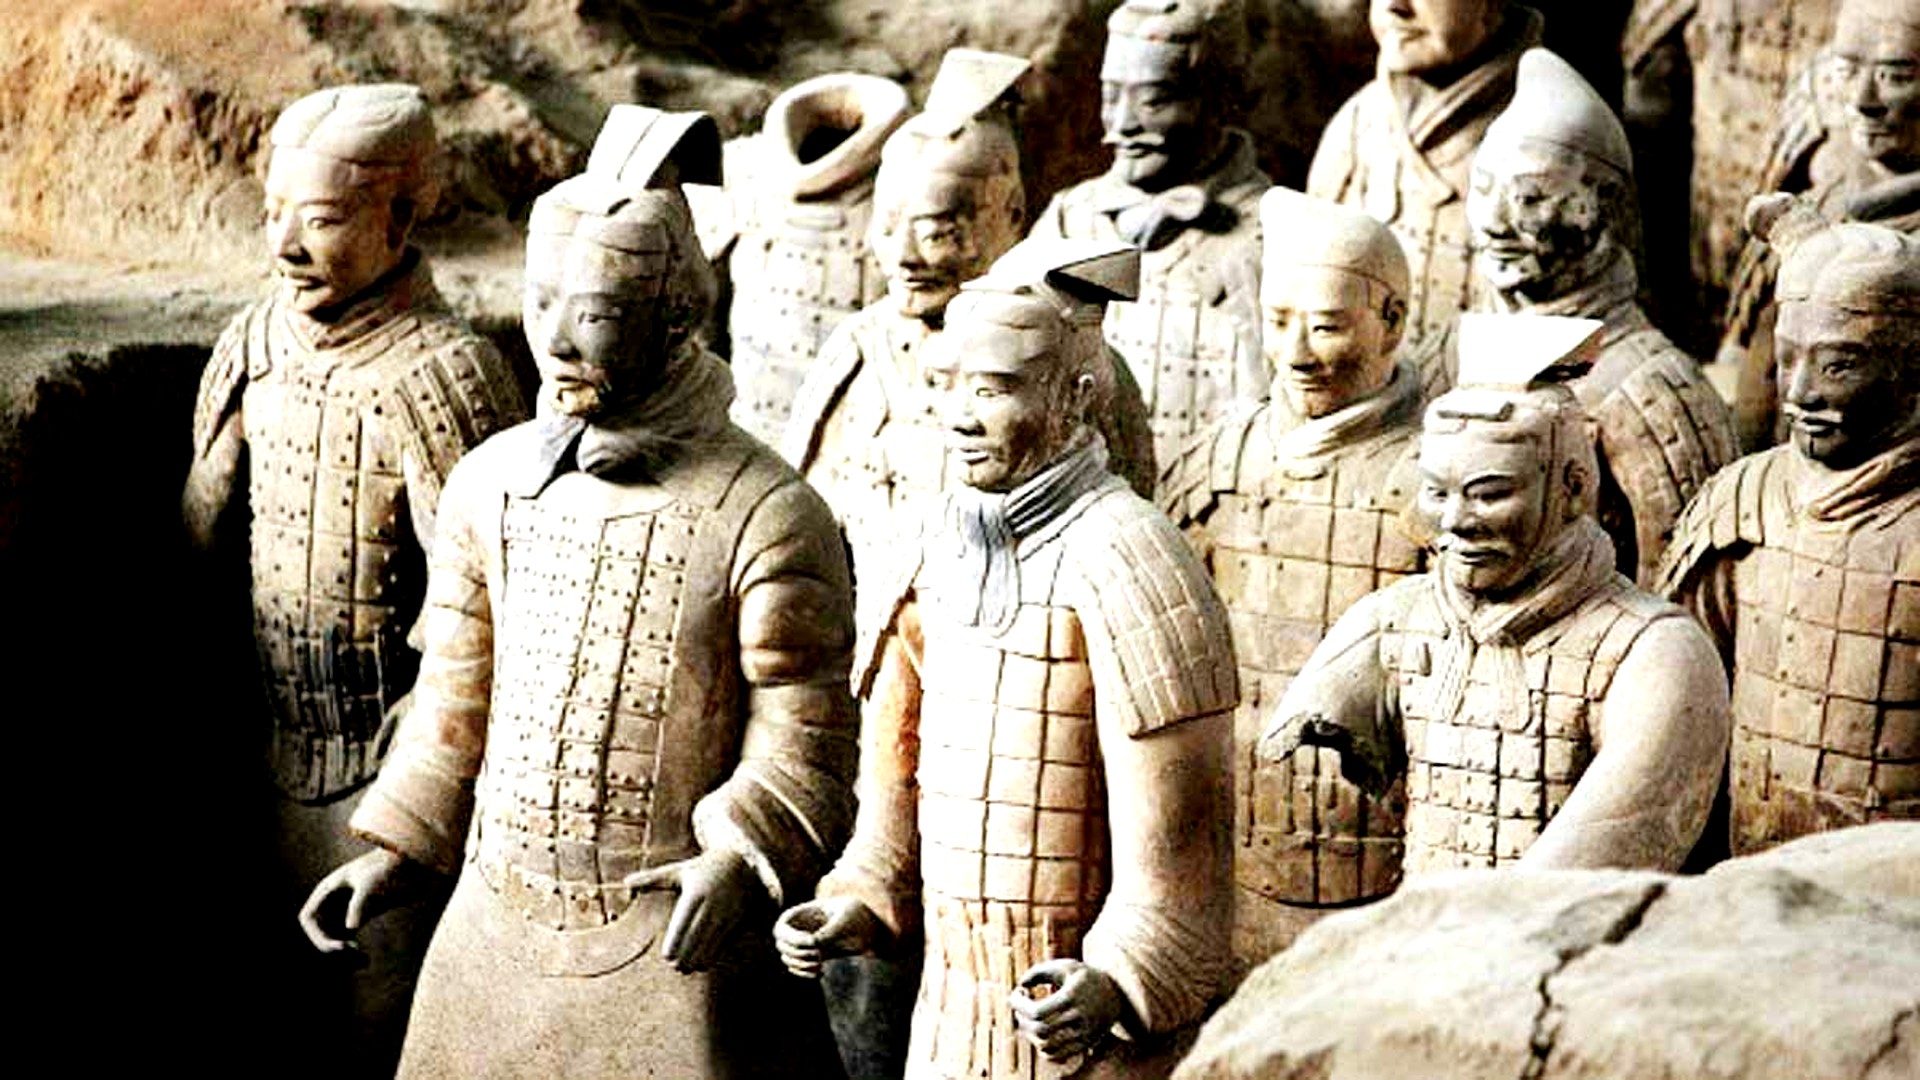 Terracotta Soldiers of China